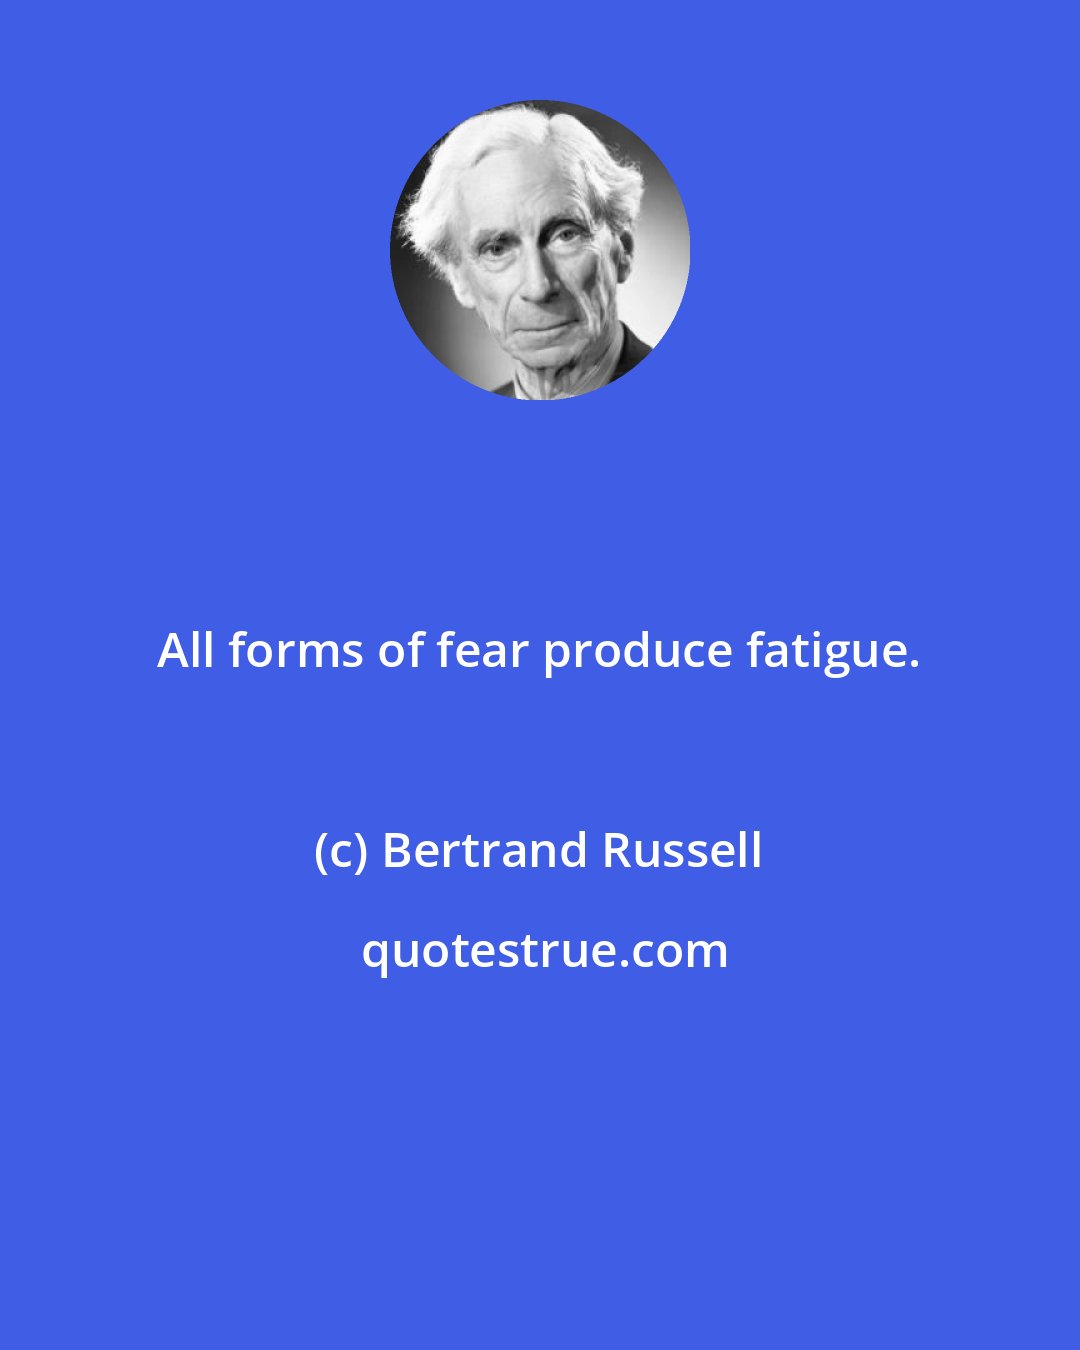 Bertrand Russell: All forms of fear produce fatigue.